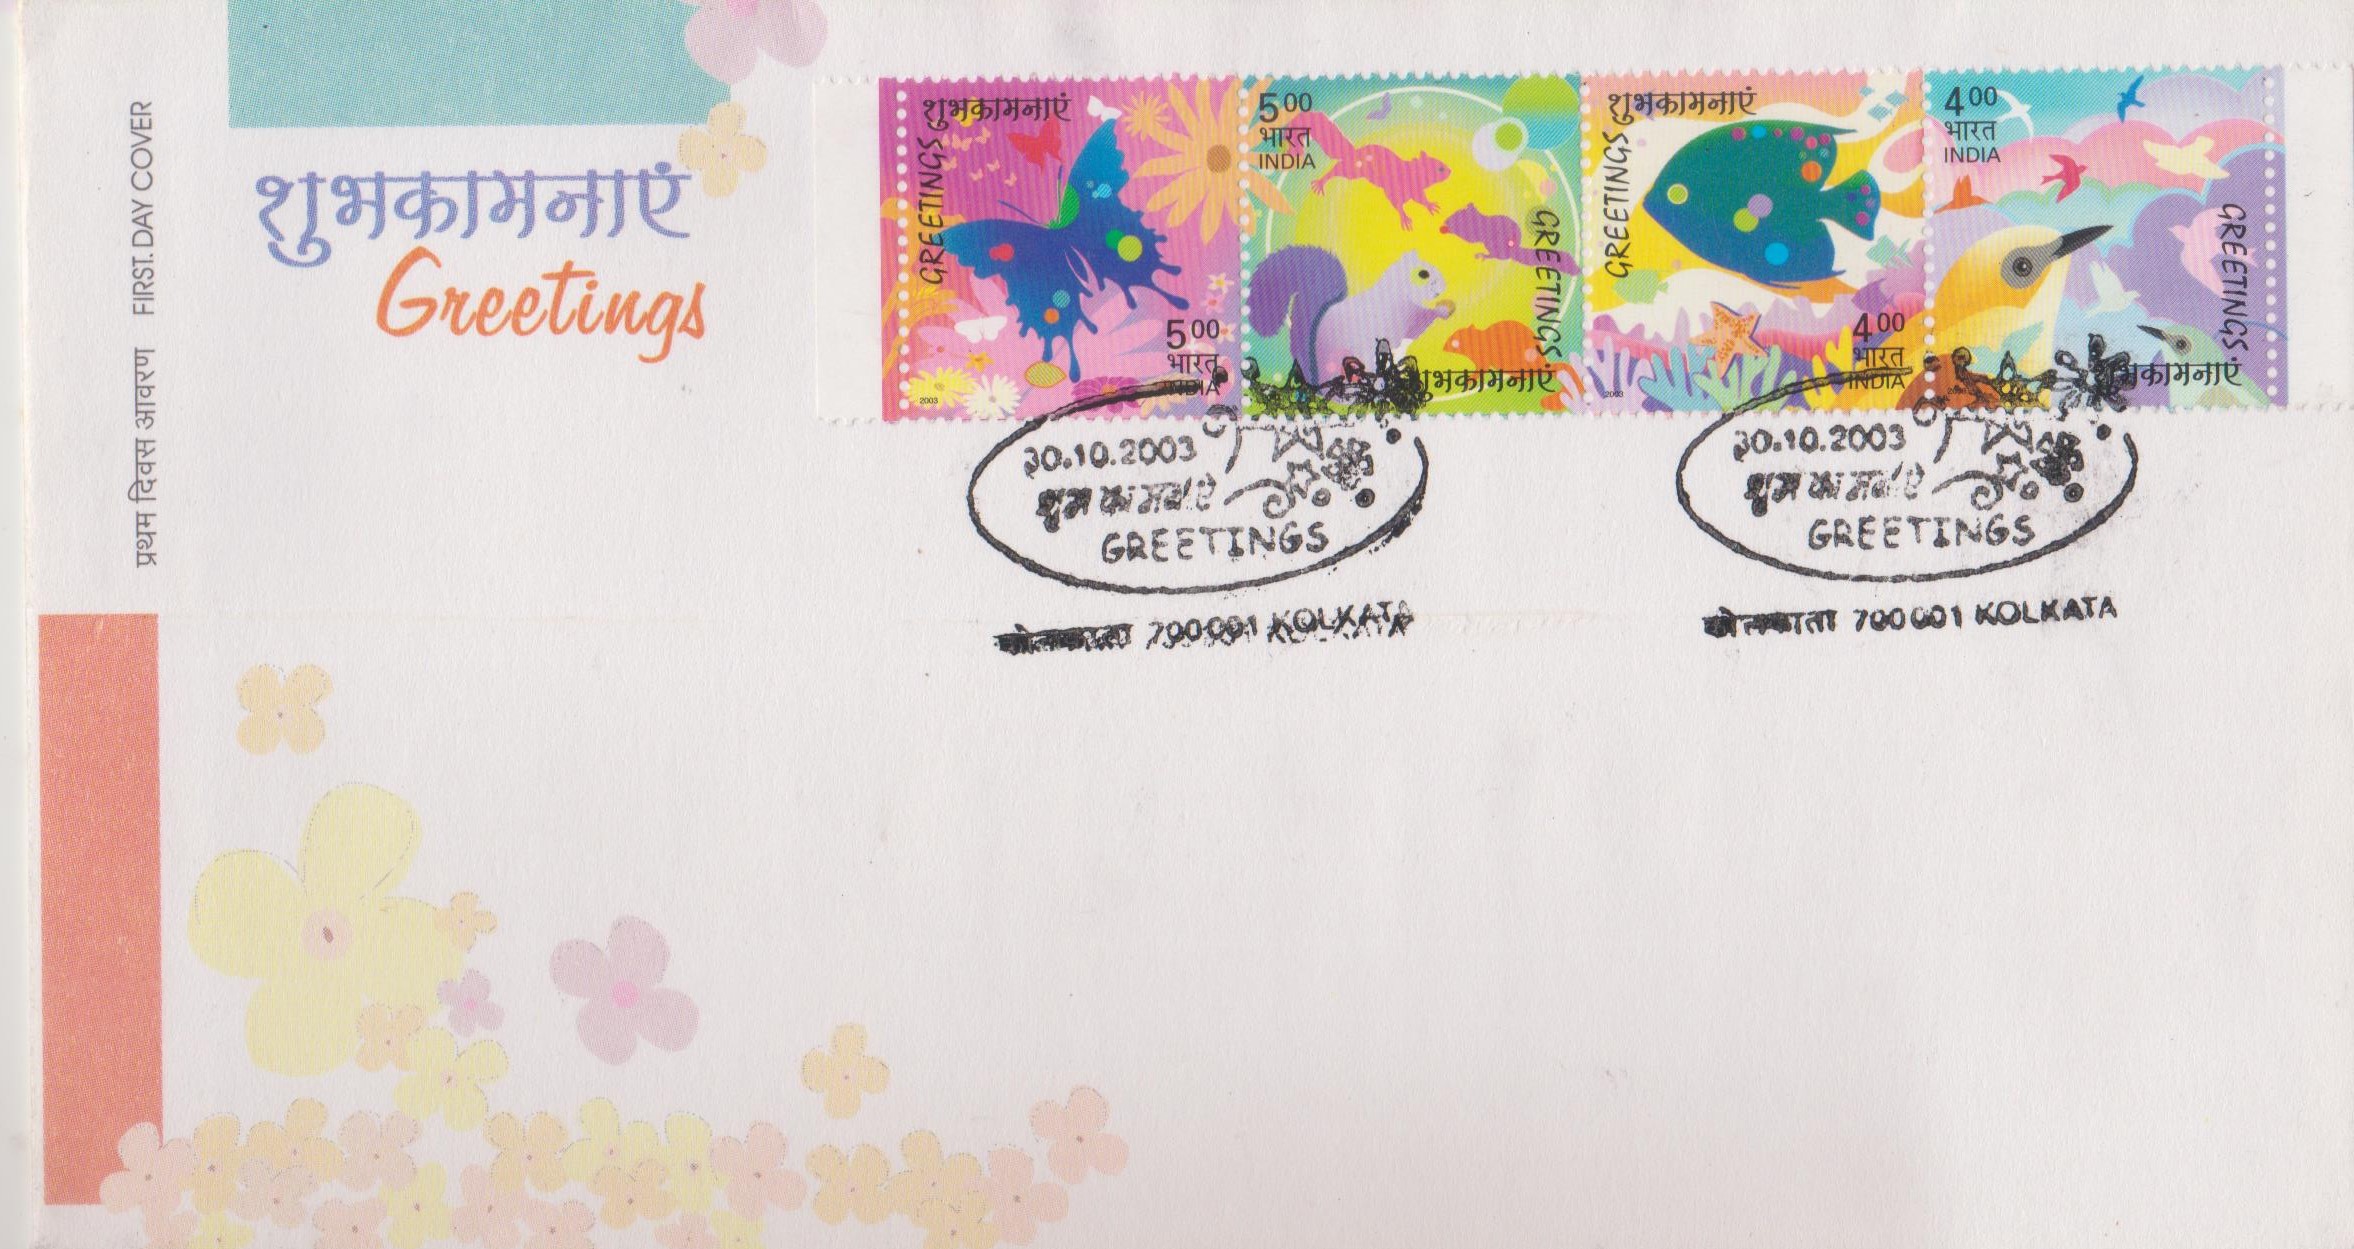 greetings first day cover